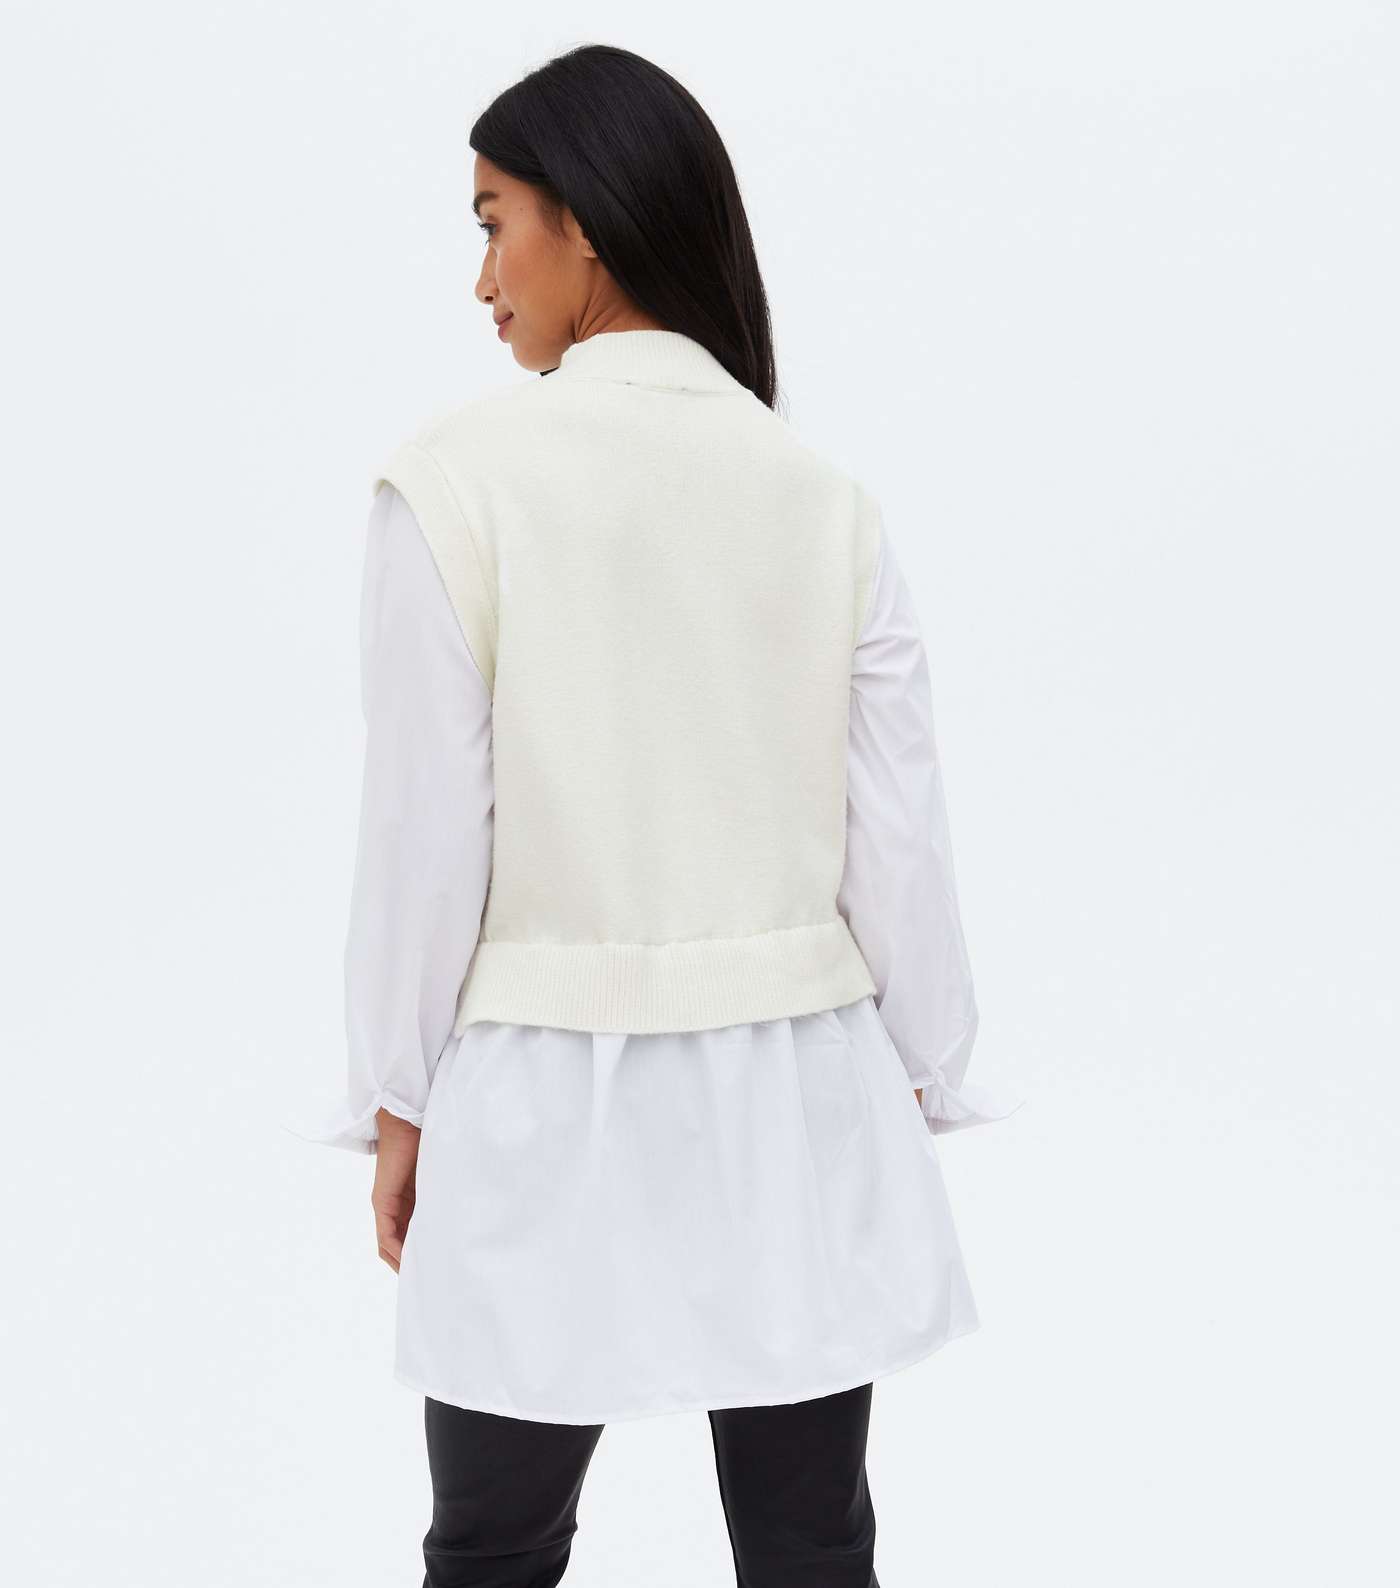 Petite Cream Cable Knit 2-in-1 Vest Jumper Shirt Image 4